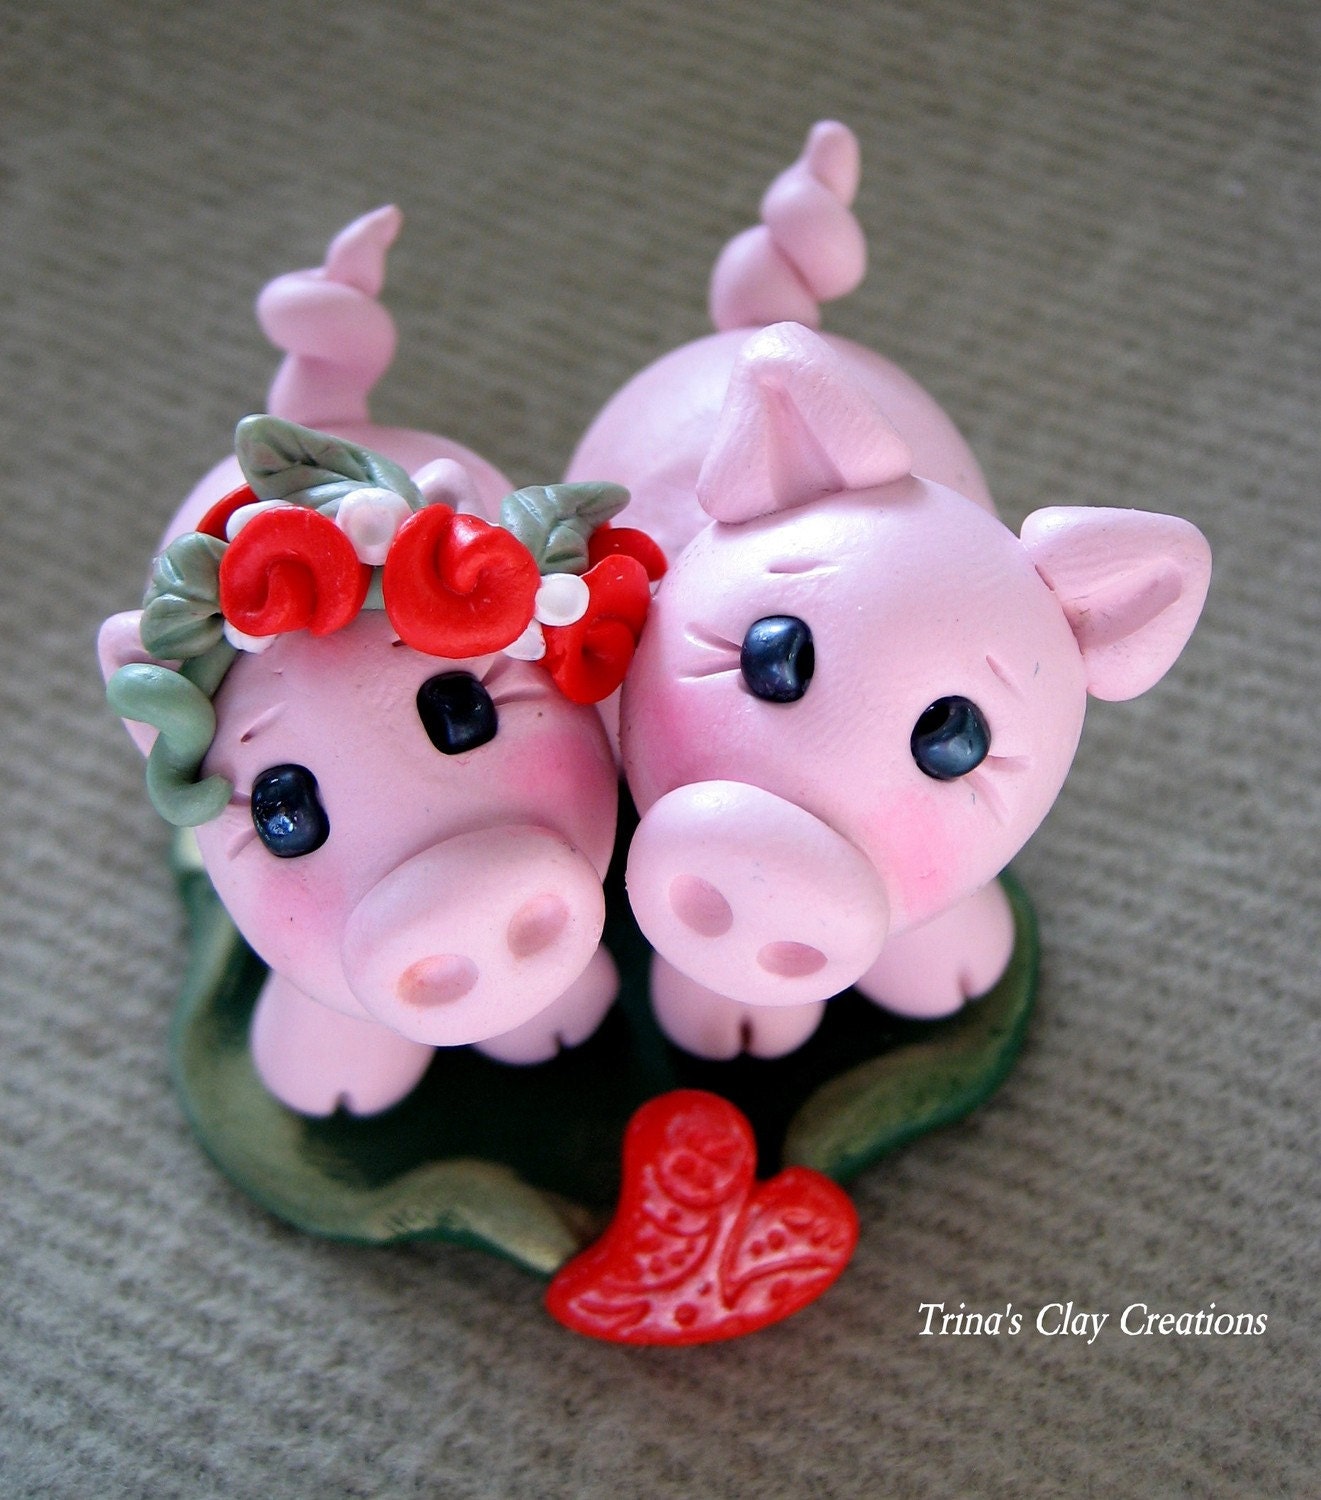 Wedding Cake Topper, Pigs, Personalized Polymer Clay Pigs in Love Wedding/Anniversary Keepsake - trinasclaycreations